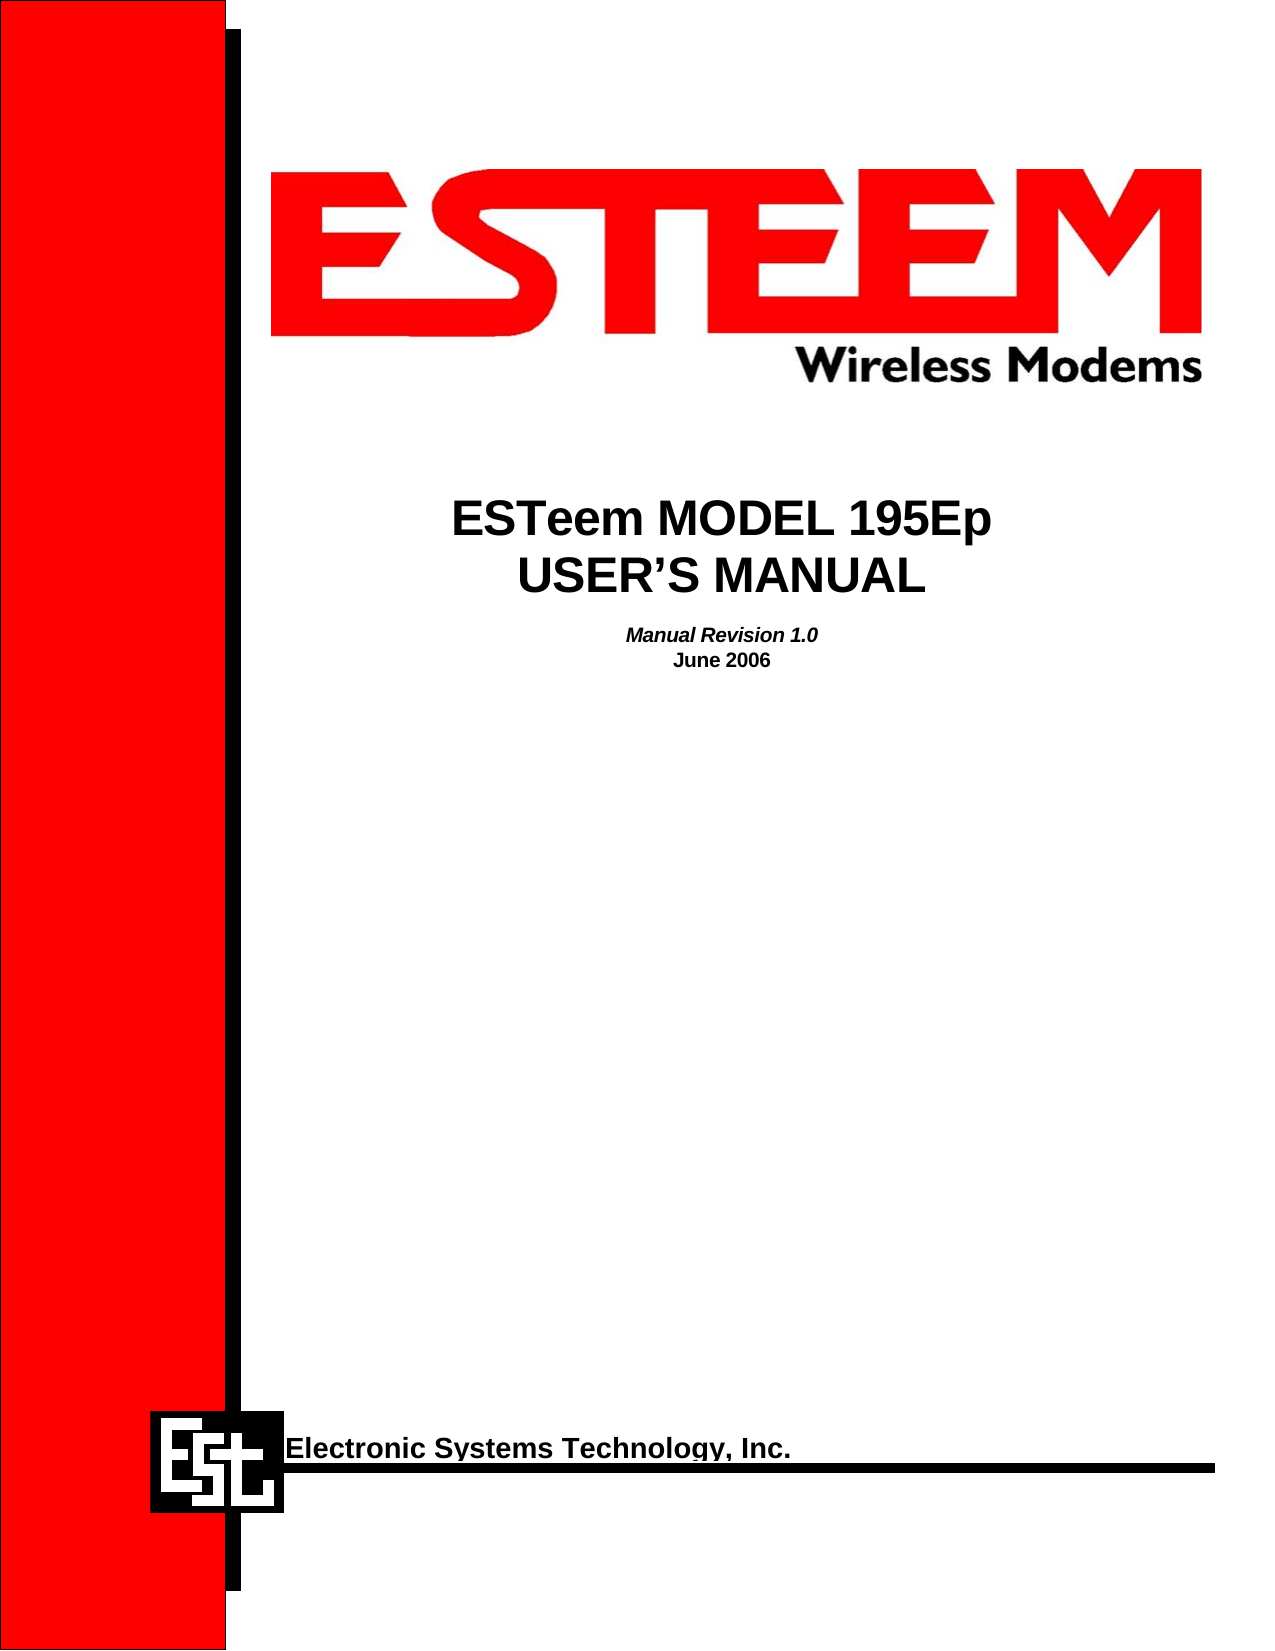                 ESTeem MODEL 195Ep USER’S MANUAL  Manual Revision 1.0 June 2006      Electronic Systems Technology, Inc.